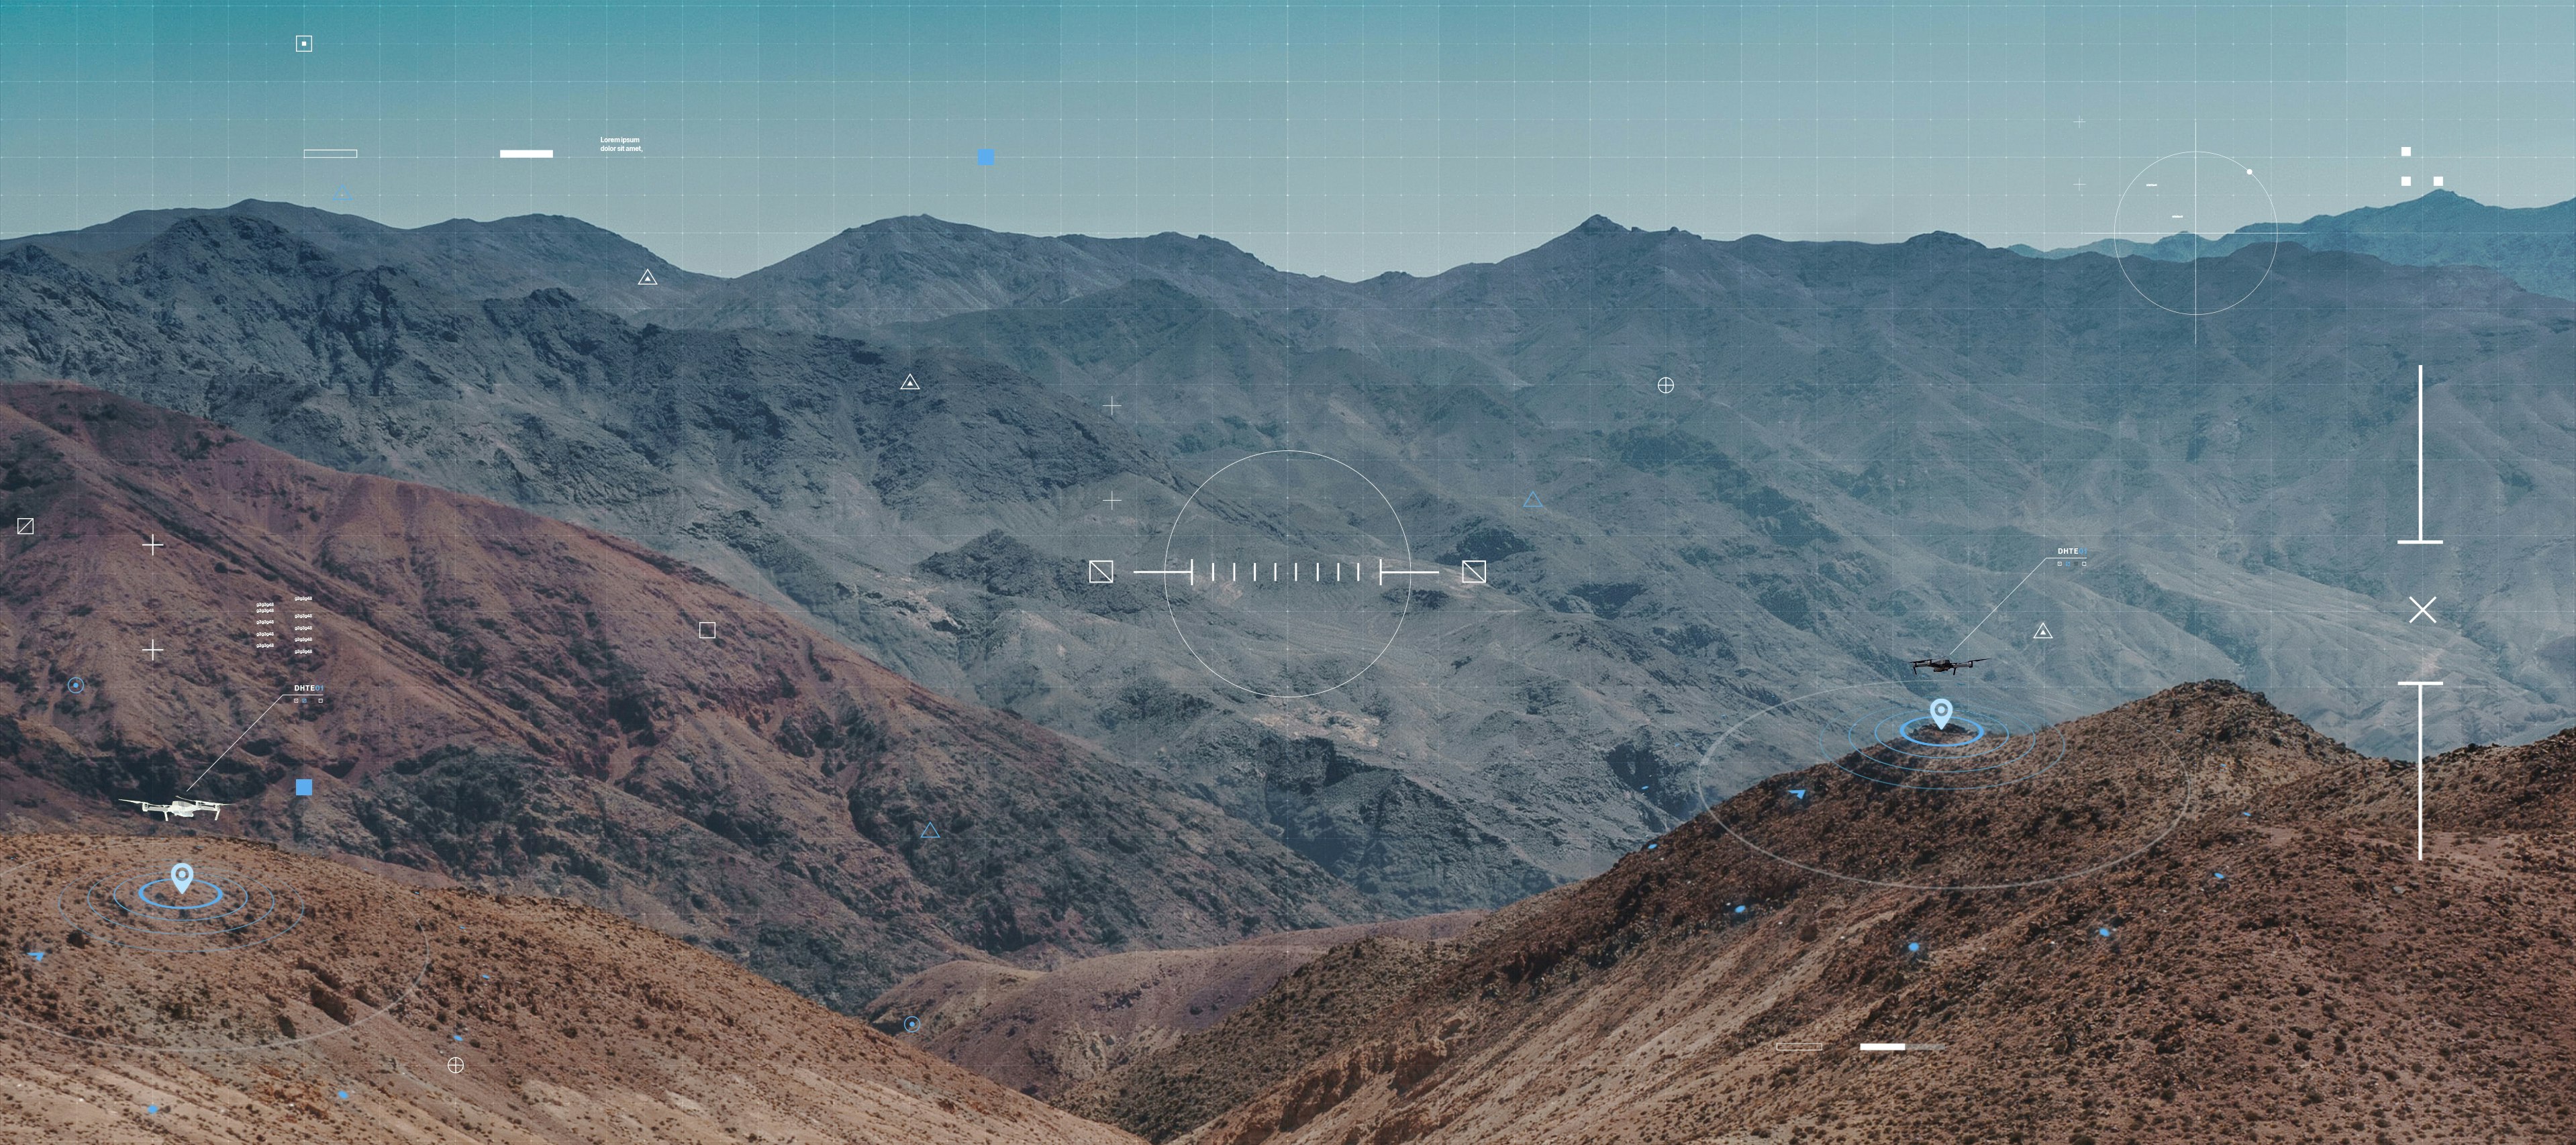 HUD graphics over mountains